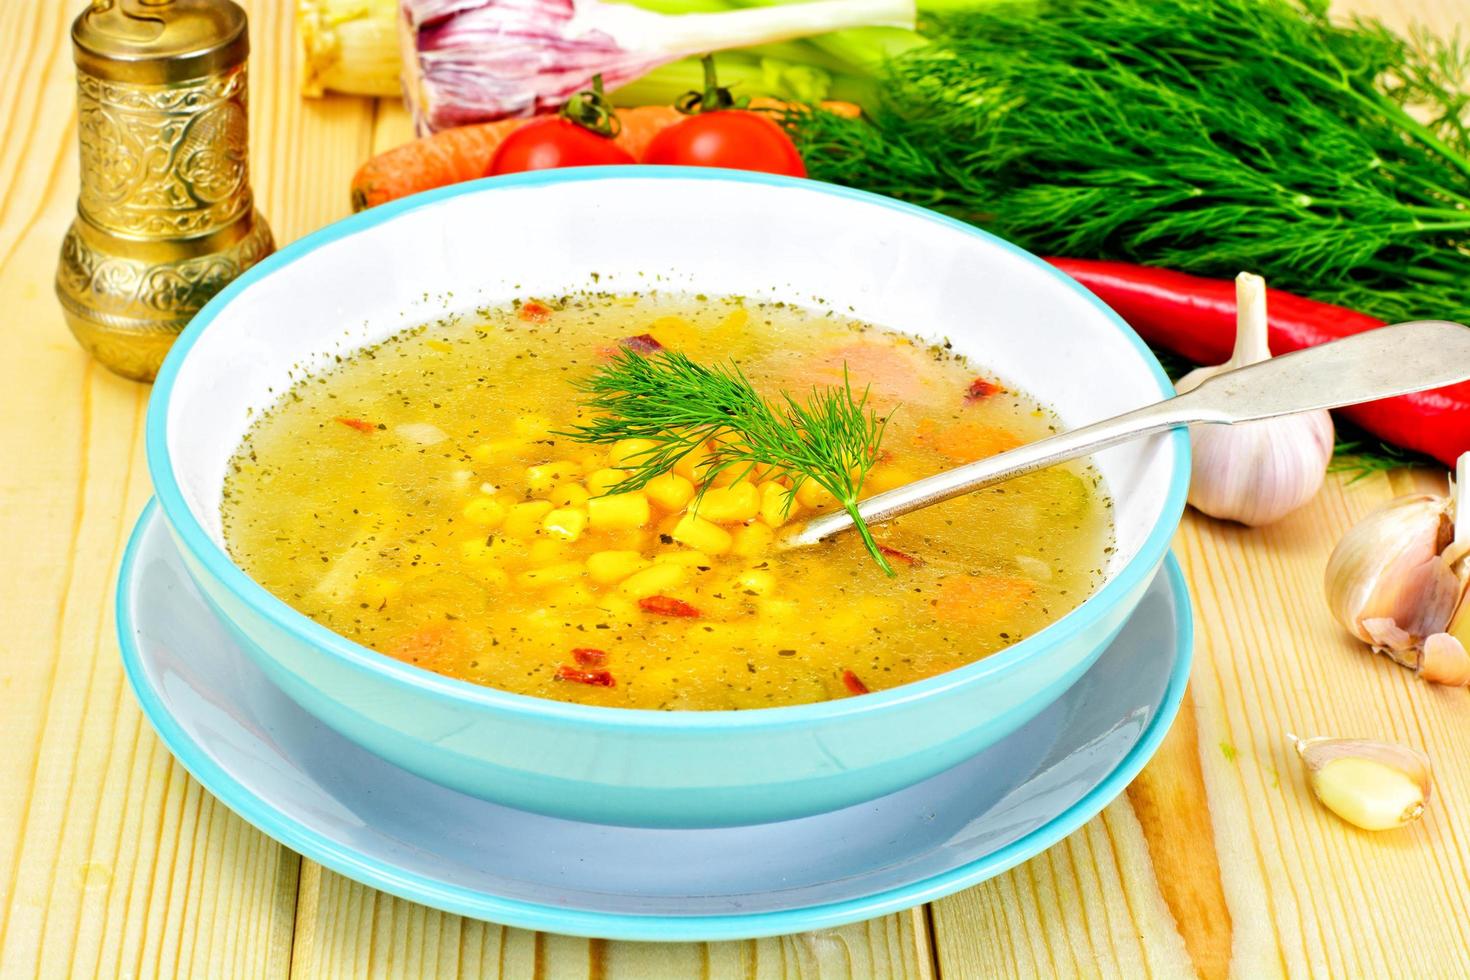 Soup with Chicken Broth. Noodles and Vegetables photo